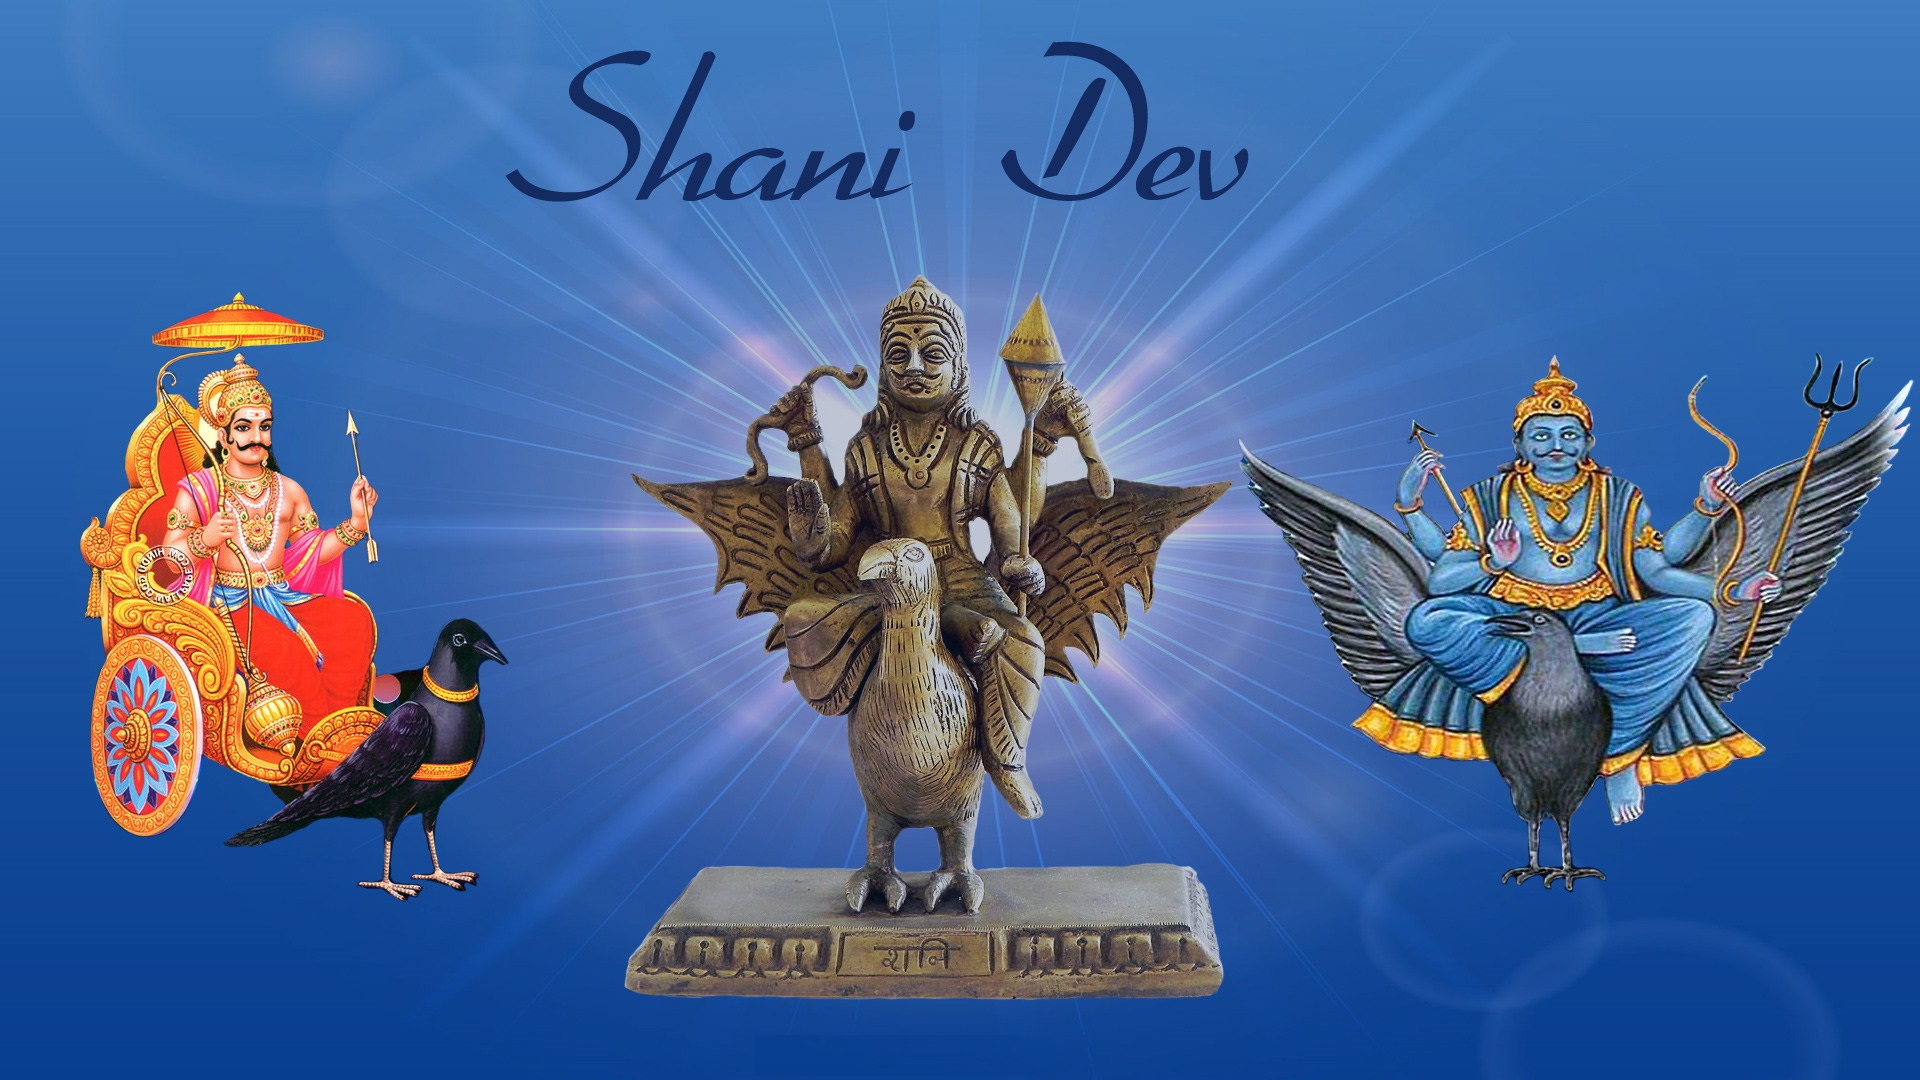 Shani Jayanti Hd Pictures Wallpapers Gifs And Ultra Hd Images For Facebook Instagram Twitter And Whatsapp